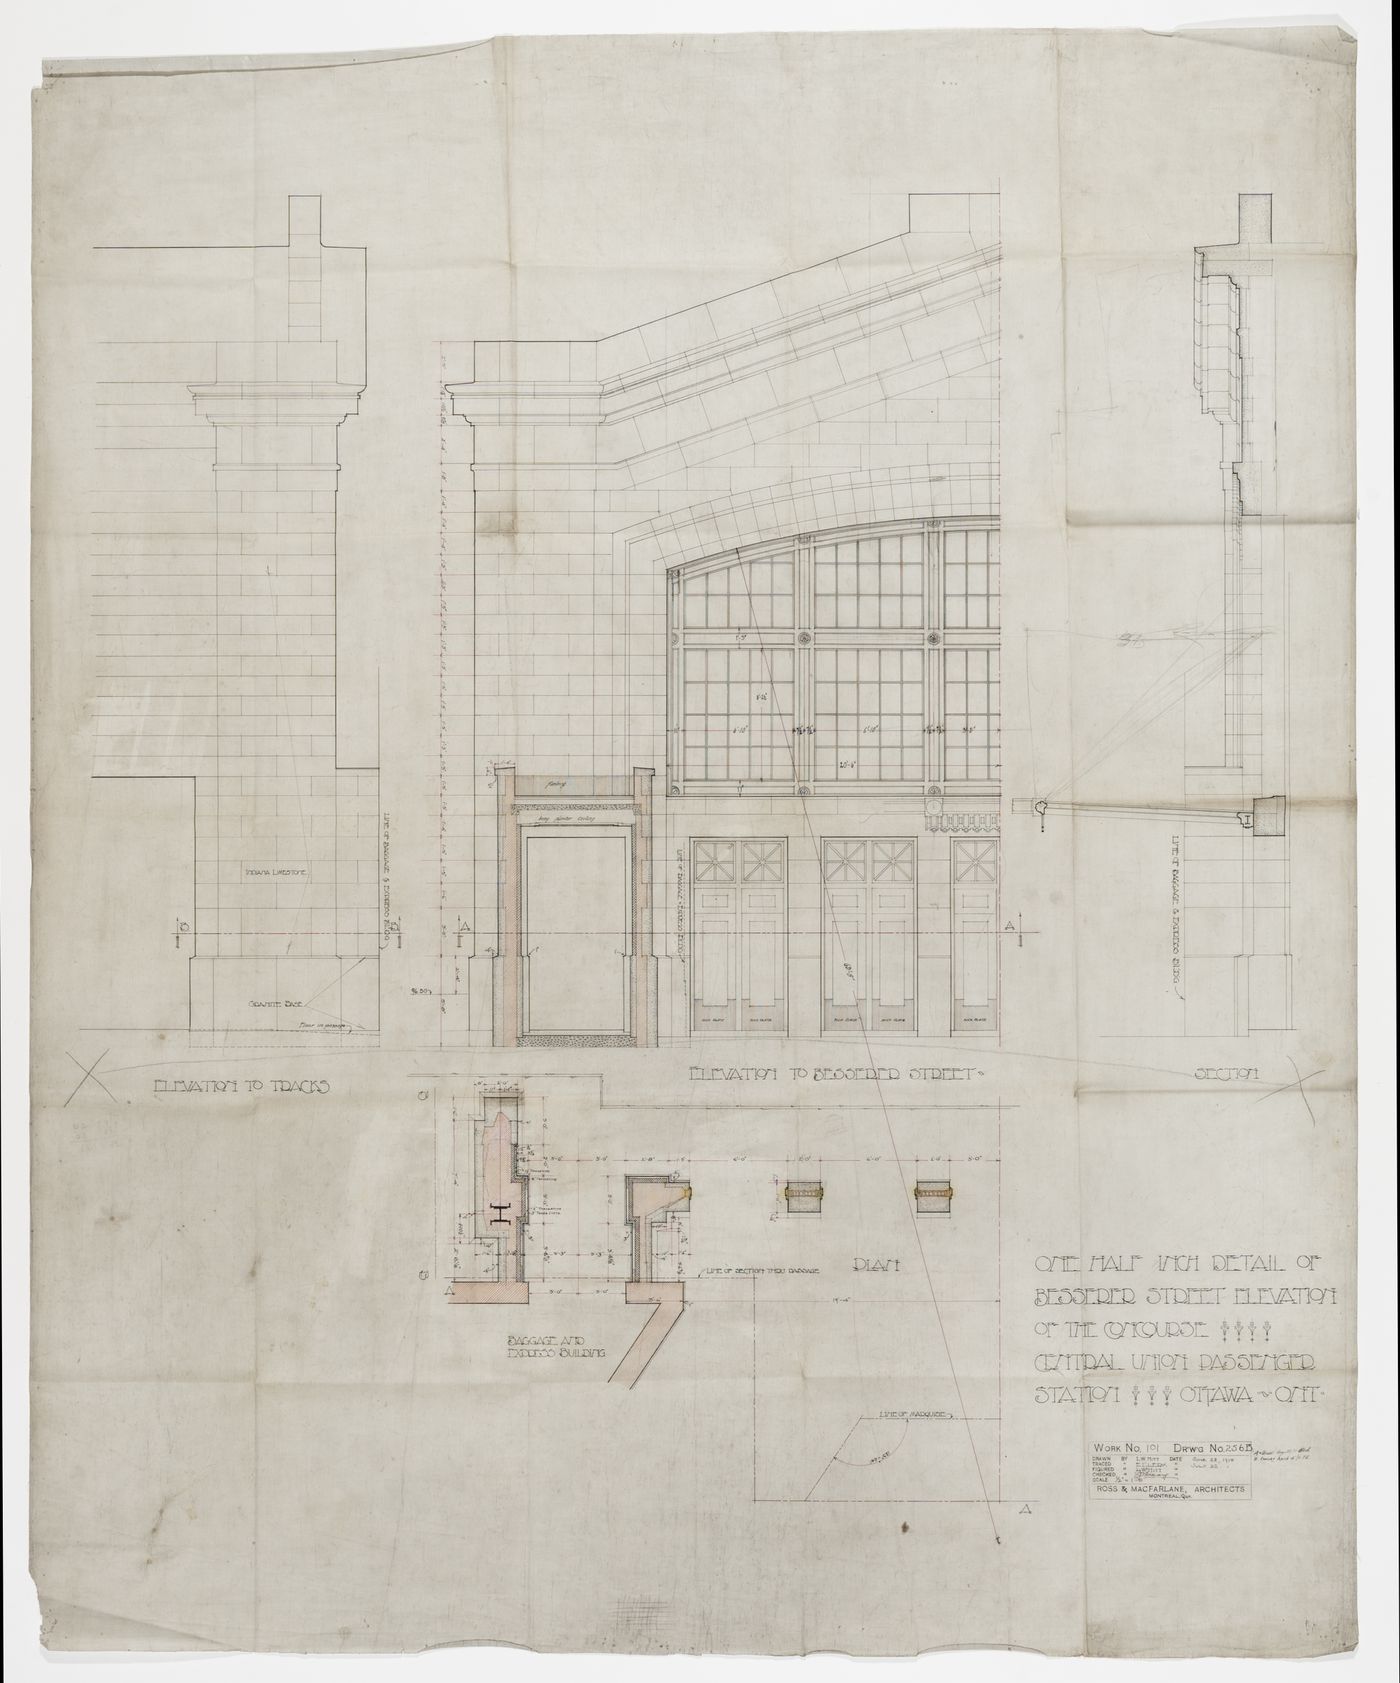 Elevations, section and plan for Central Union Passenger Station, Ottawa, Ontario